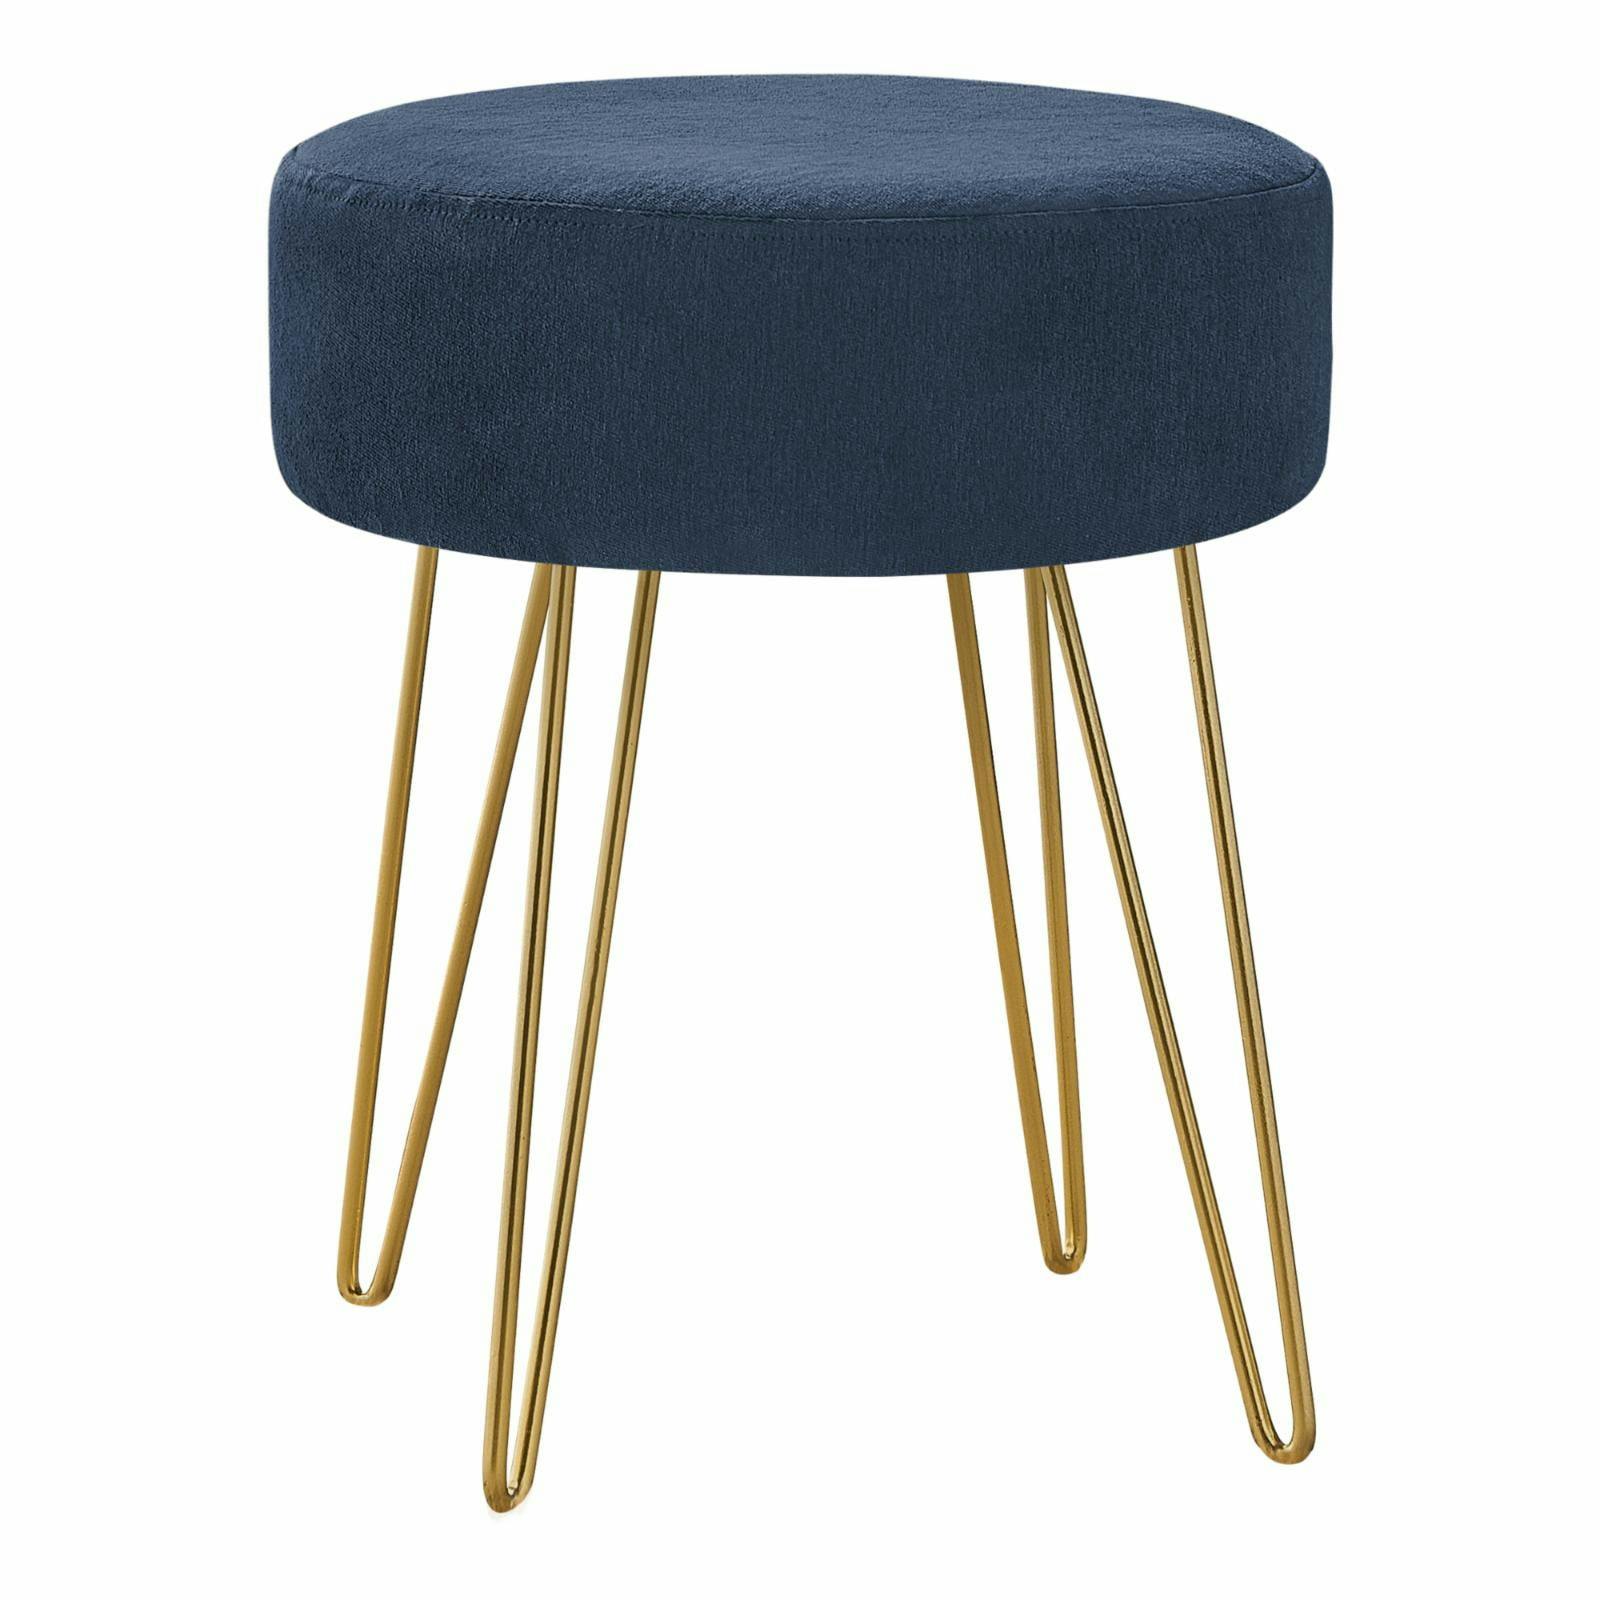 Contemporary Blue Tufted Round Pouf with Gold Metal Legs